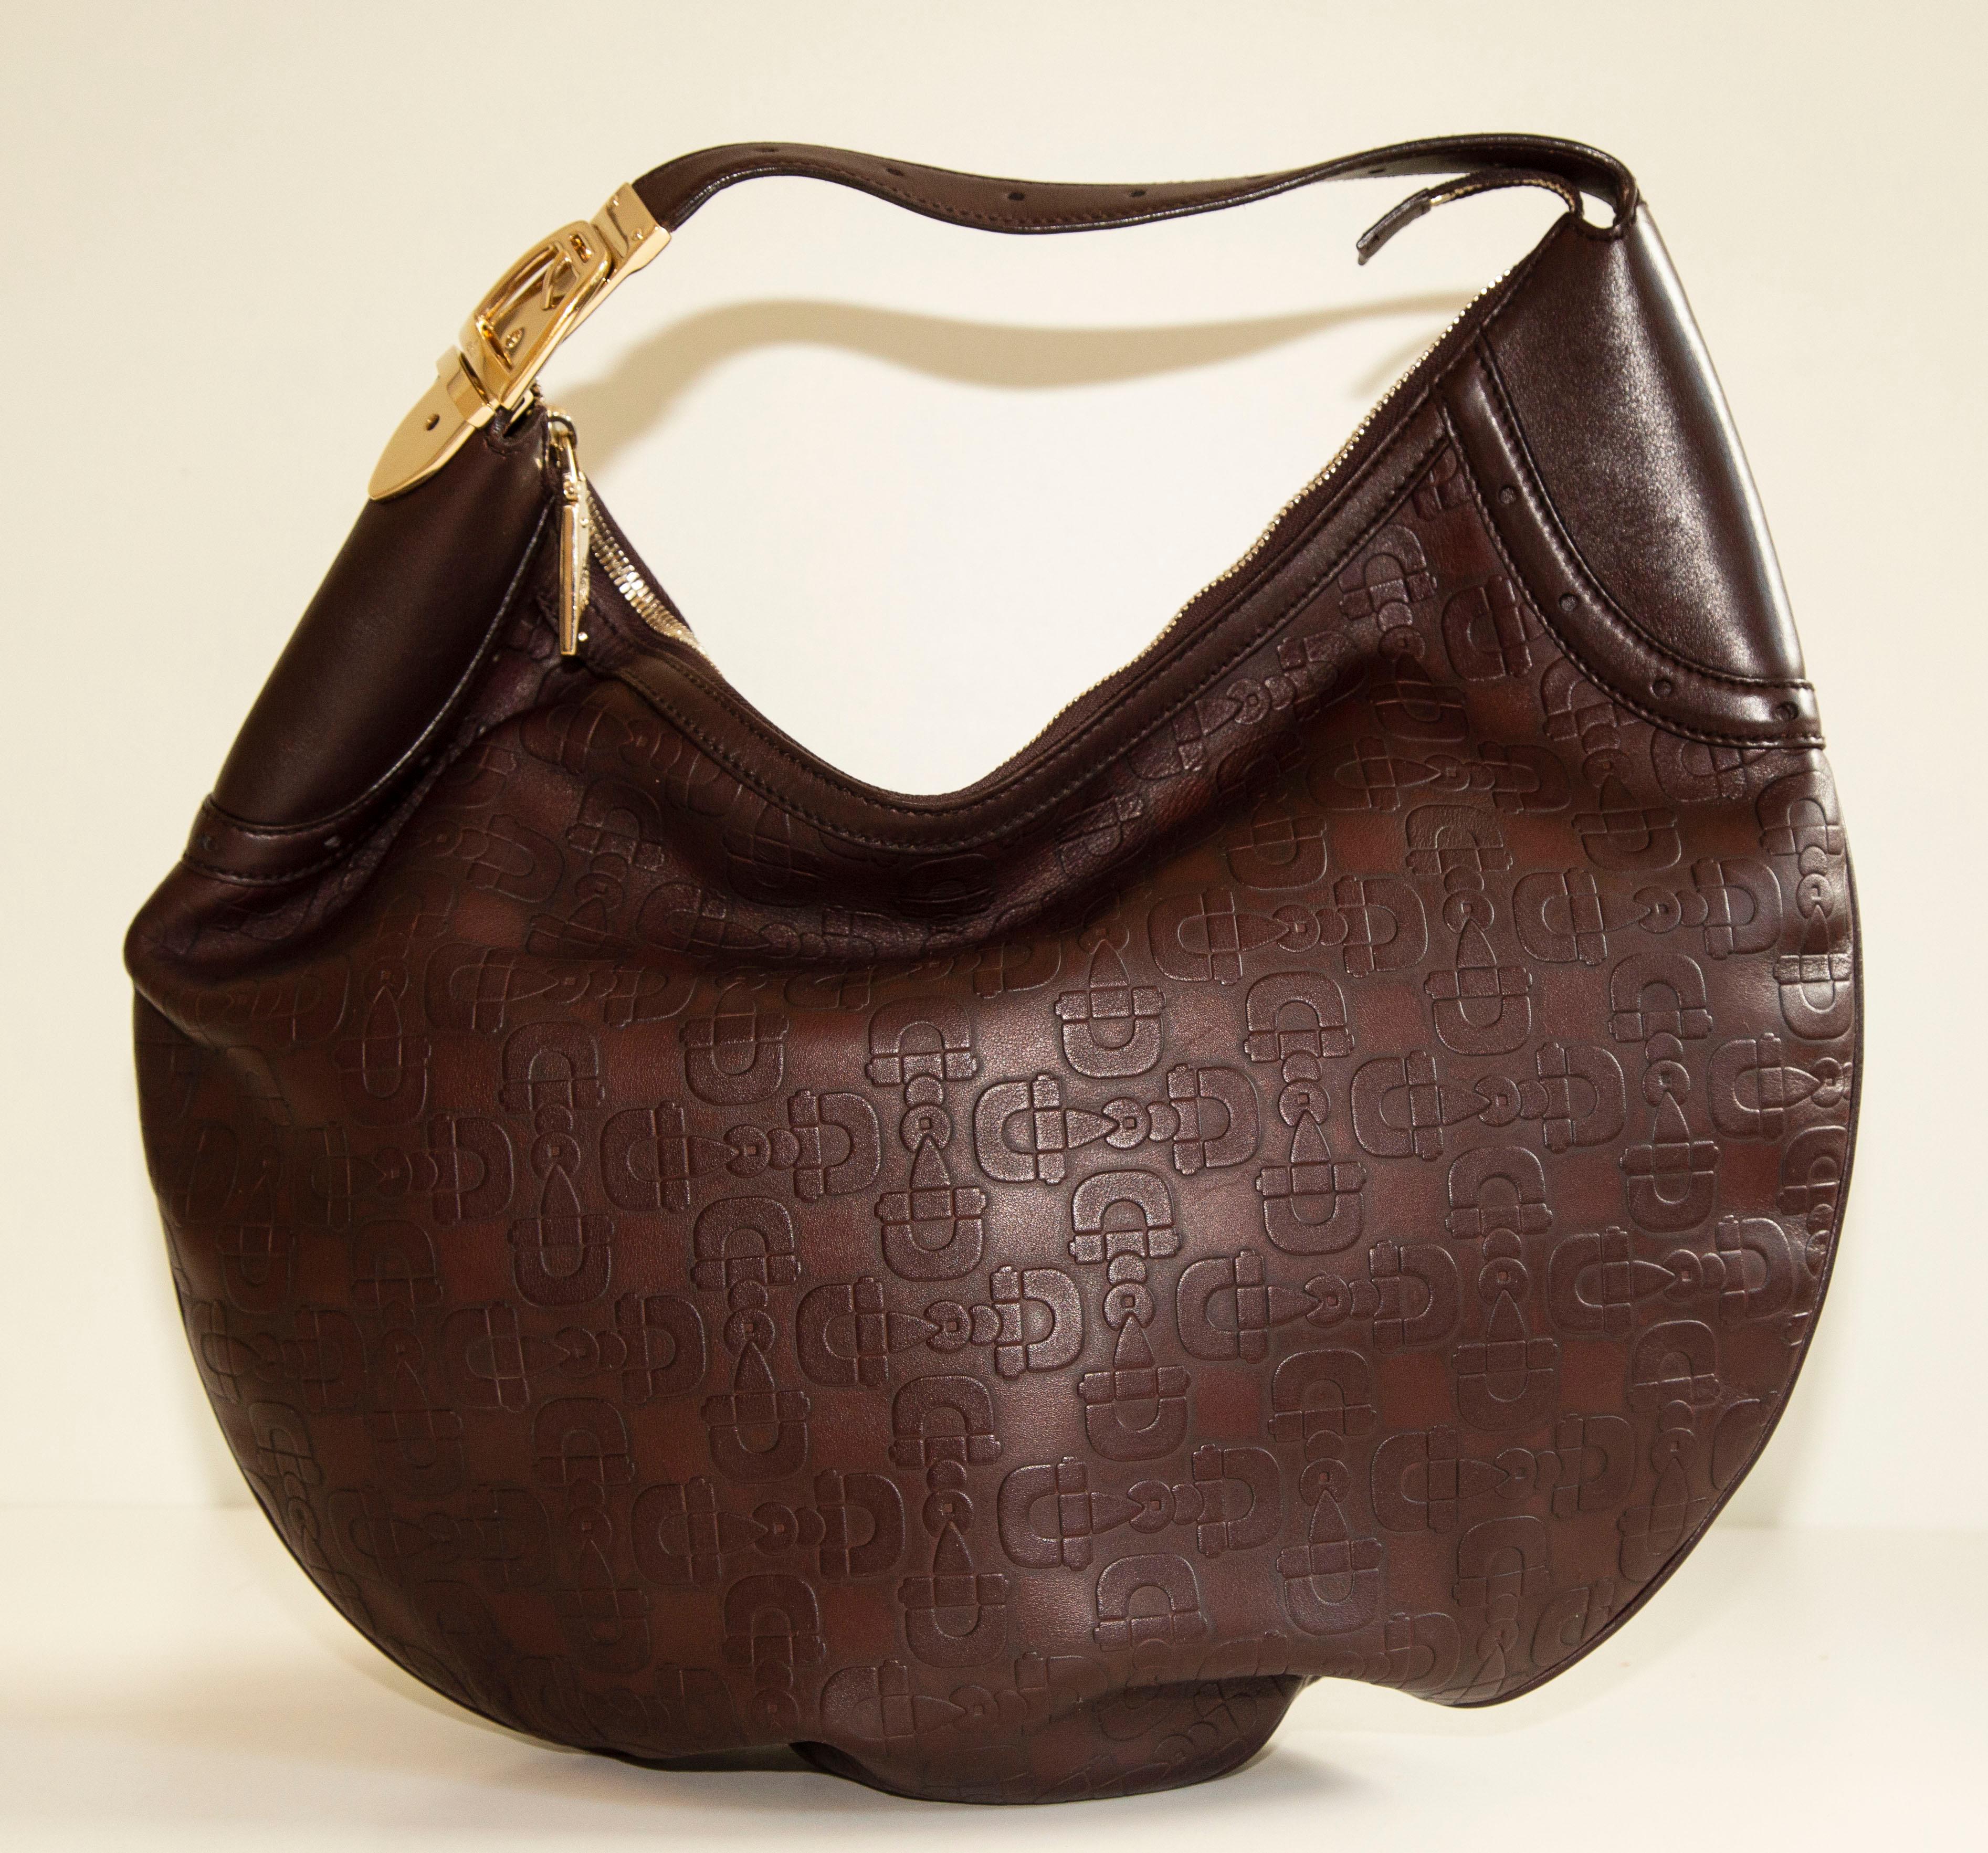 A vintage, genuine Gucci brown/dark bordeaux leather horsebit embossed buckle hobo shoulder bag with gold-tone hardware. The interior is lined with dark brown fabric and it consists of one central compartment and one side pocket with a zipper. The